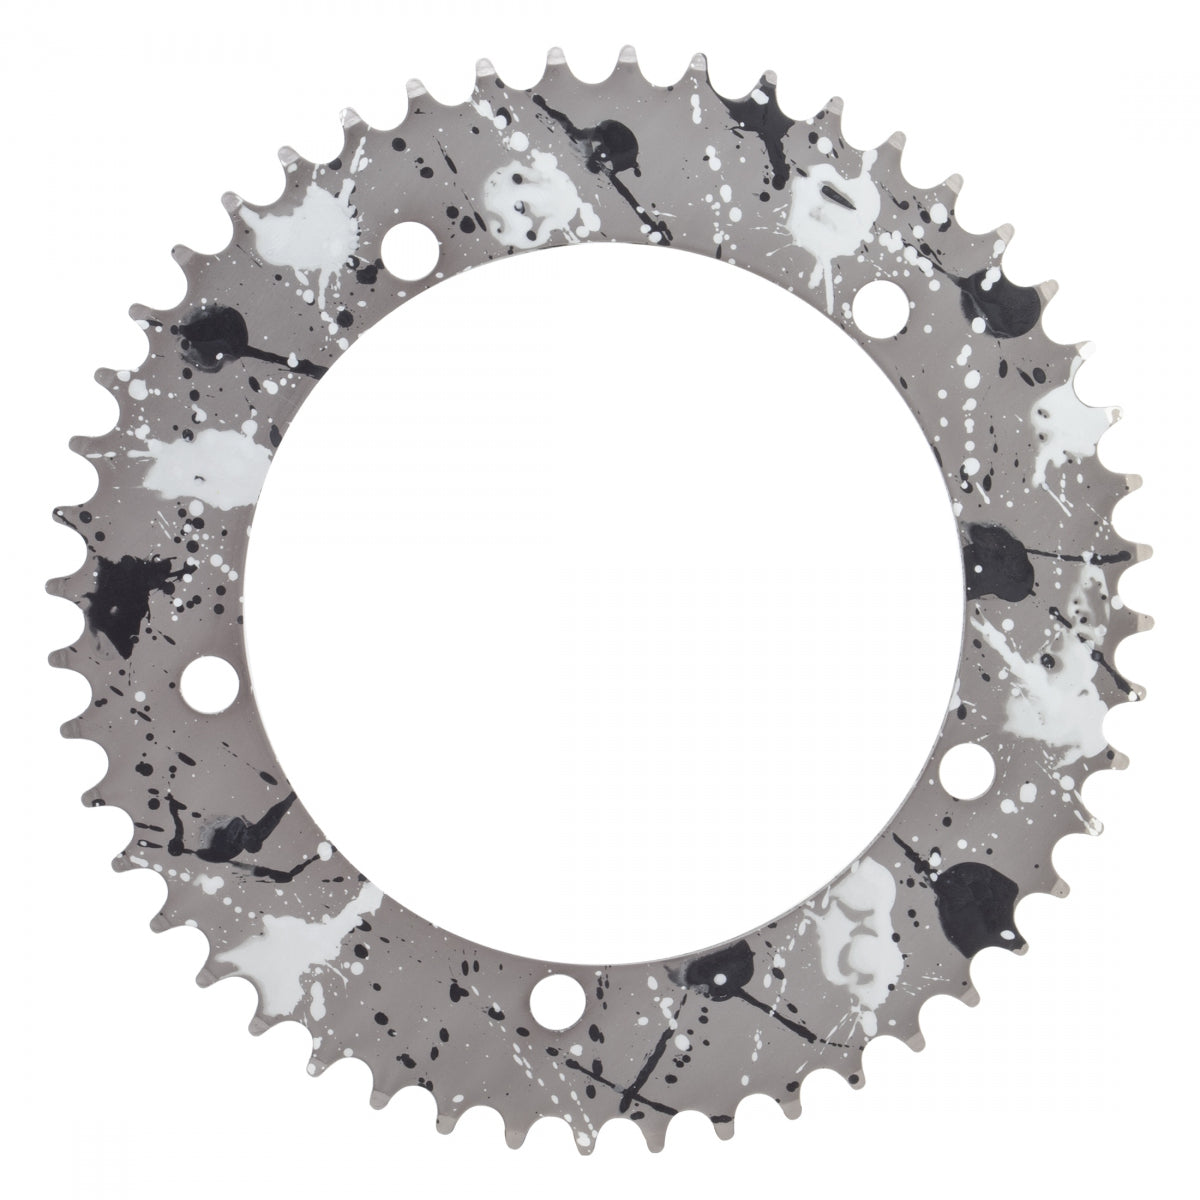 Chainring Or8 Splat Trk 144Mm 50T Aly 1/8 Sl-Ano W/Bk/Wh